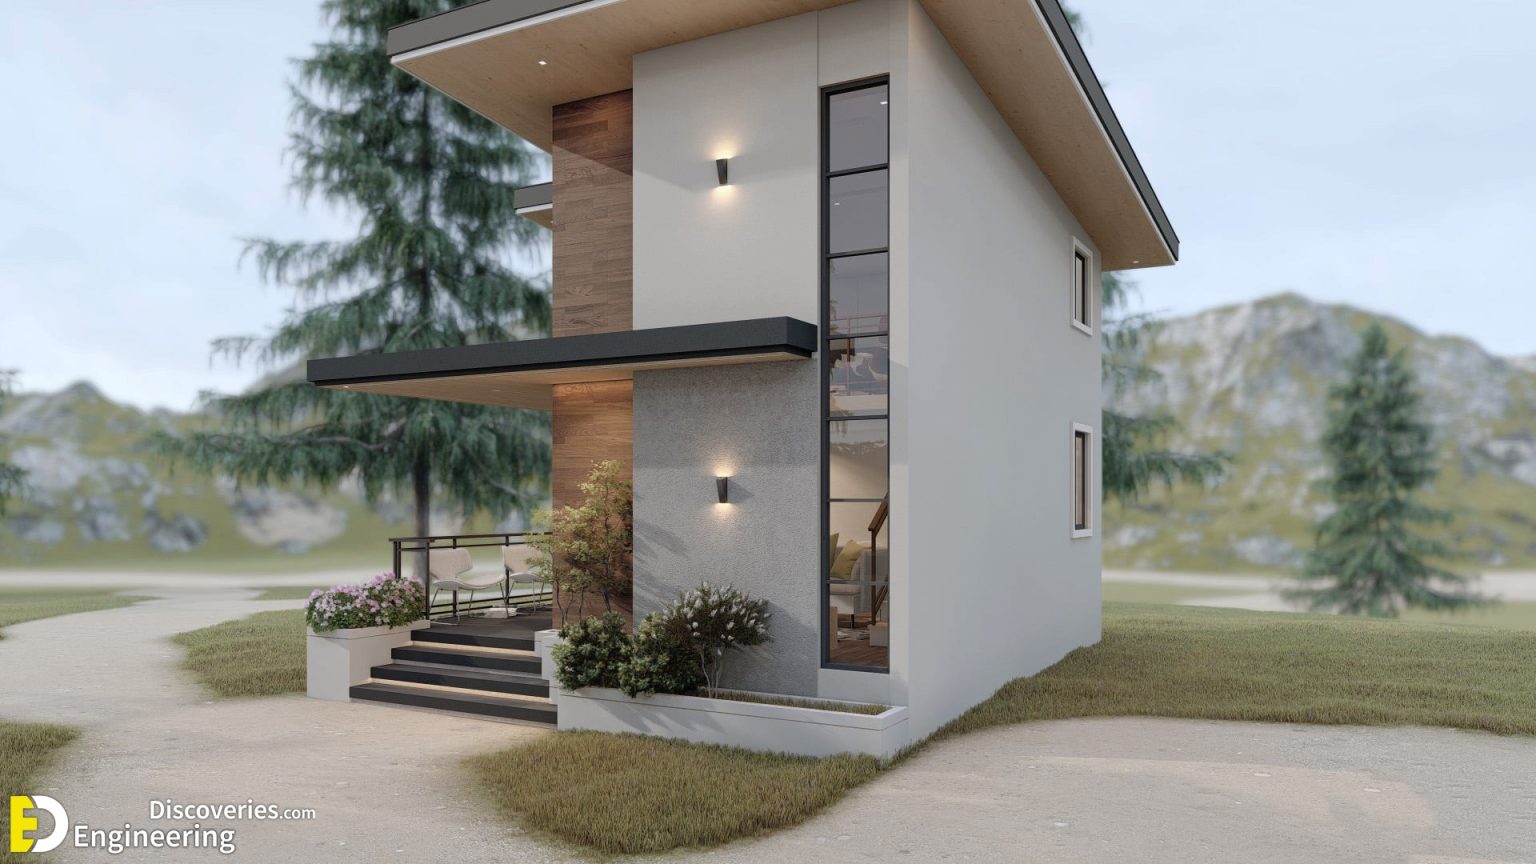 Elegant Small House Design 5.5m x 6.5m With 2 Bedroom | Engineering ...